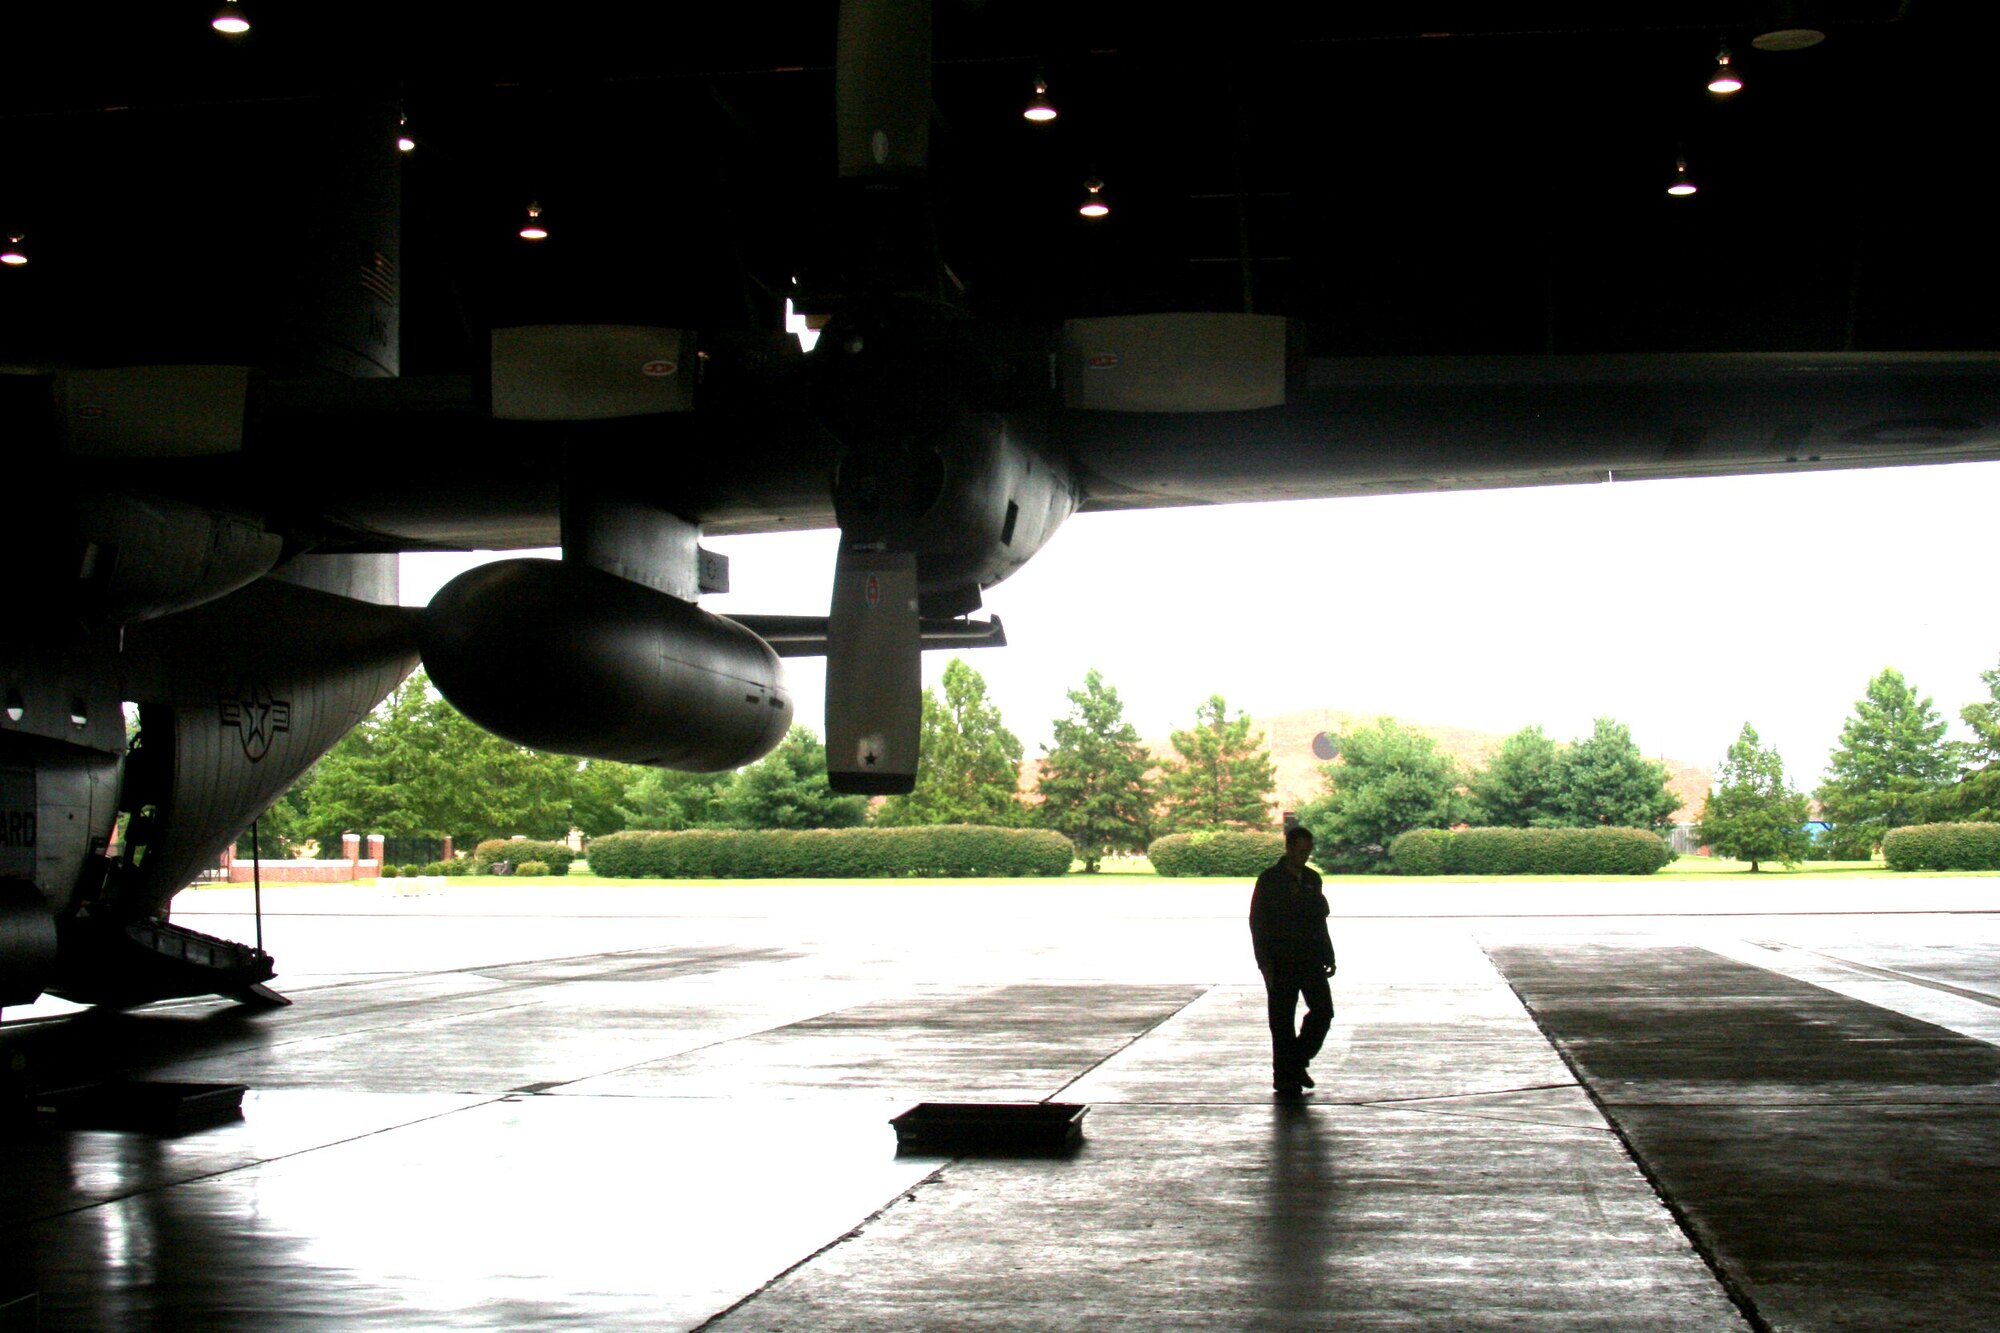 Master Sgt. John Gorsuch, C-130 Hercules loadmaster and instructor for Air Mobility Command's Detachment 5 at the Advanced Airlift Tactics Training Center at St. Joseph, Mo., looks over a C-130 aircraft display at Scott Air Force Base, Ill., on Aug. 20, 2010. (U.S. Air Force Photo/Master Sgt. Scott T. Sturkol)